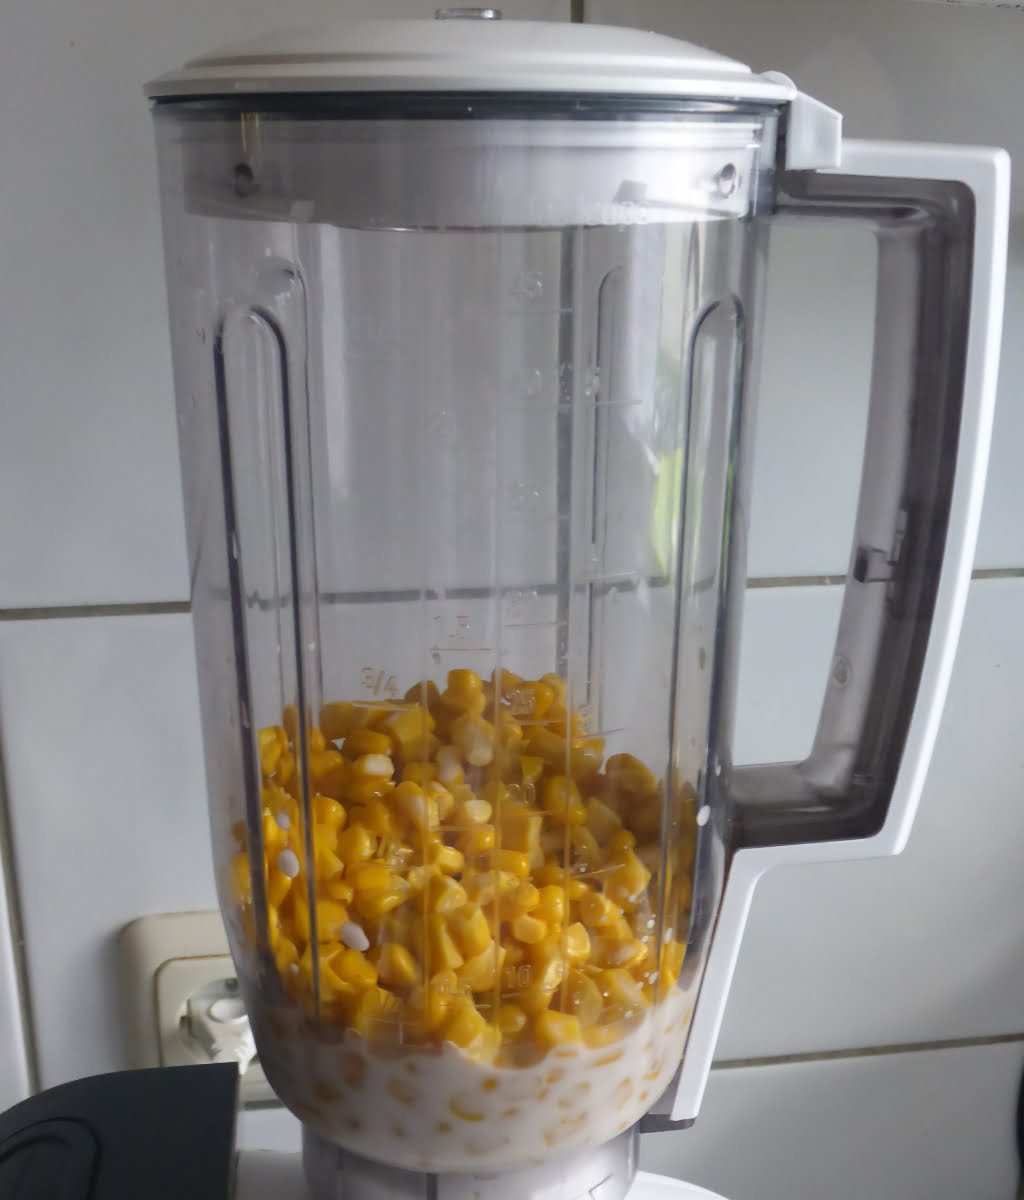 Blending very well drained canned sweetcorn in a food processor with milk.